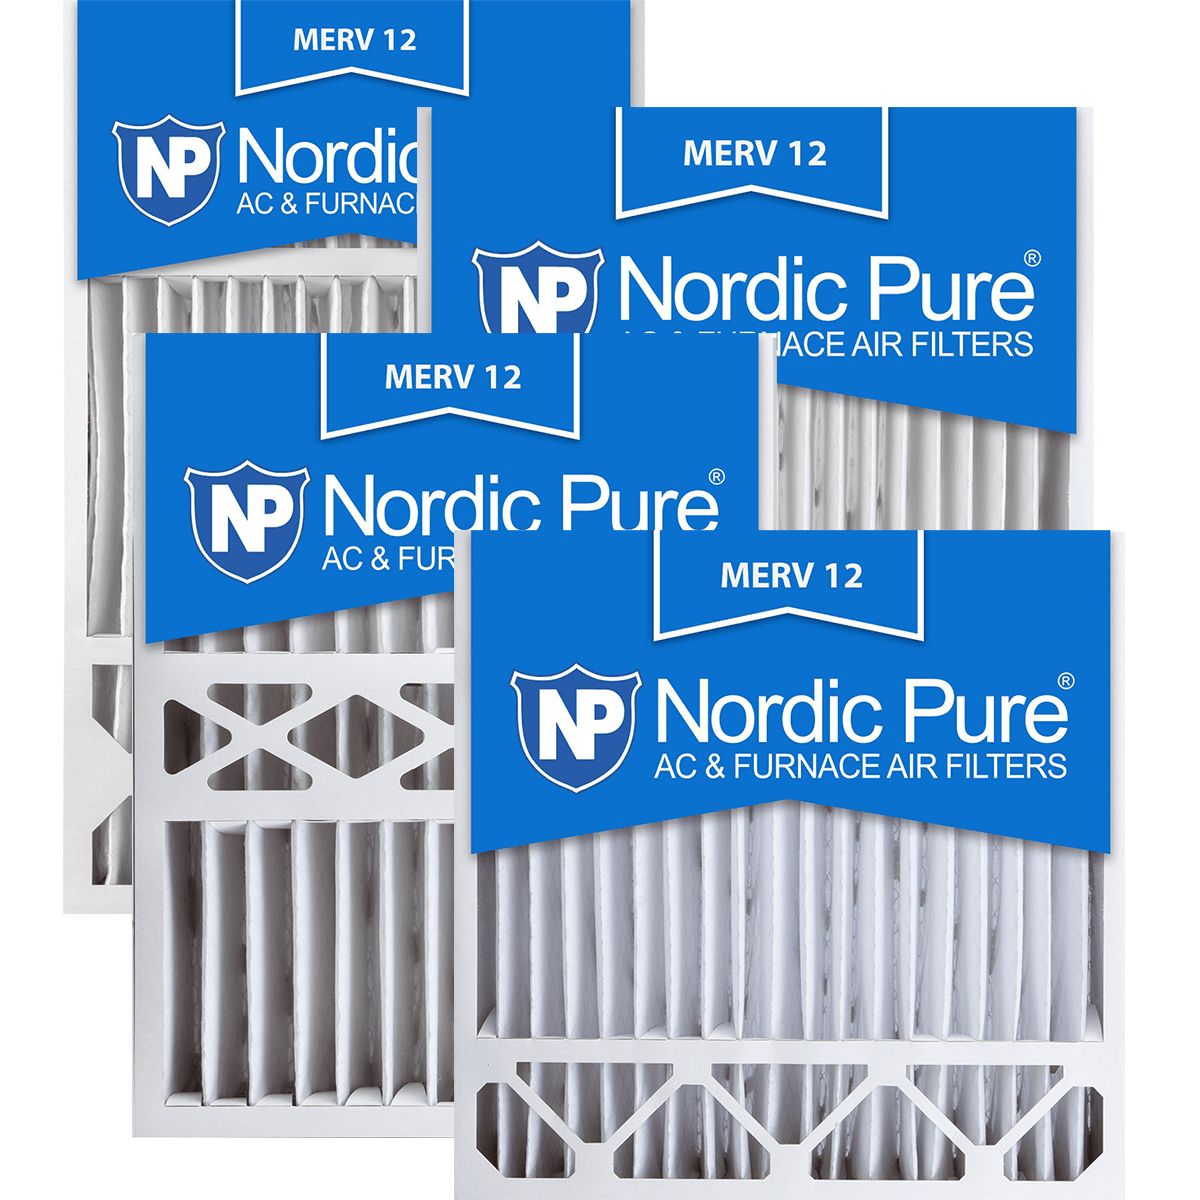 Nordic Pure Merv 12 5-in. Pleated Furnace Filters